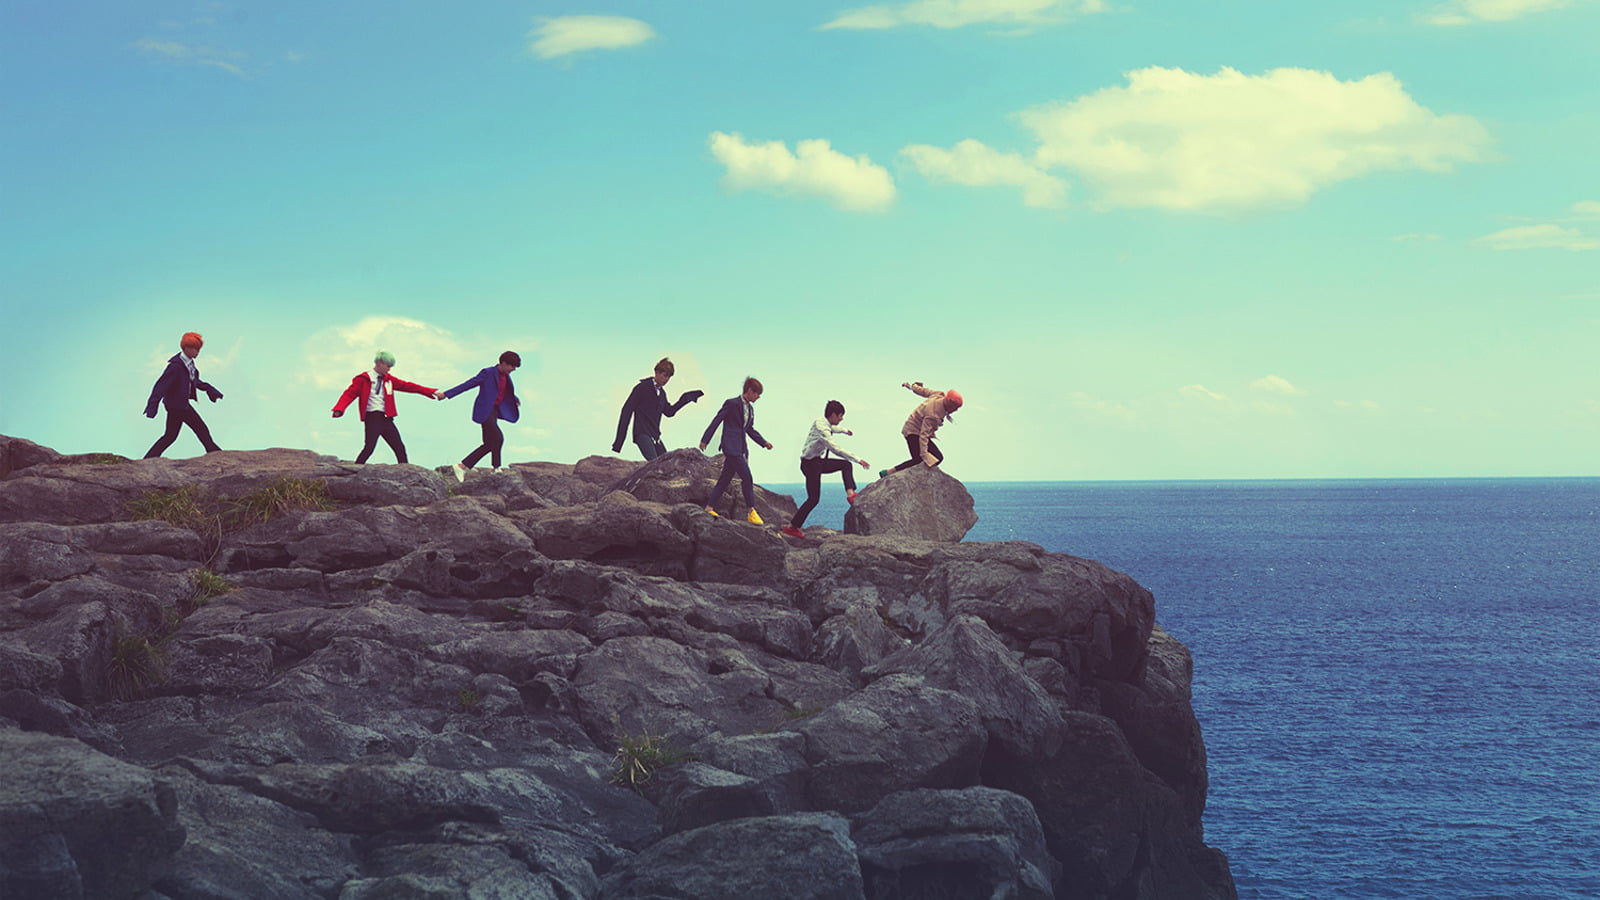 Brown stone hill wallpaper, Music, BTS, sky, sea, water, group of people